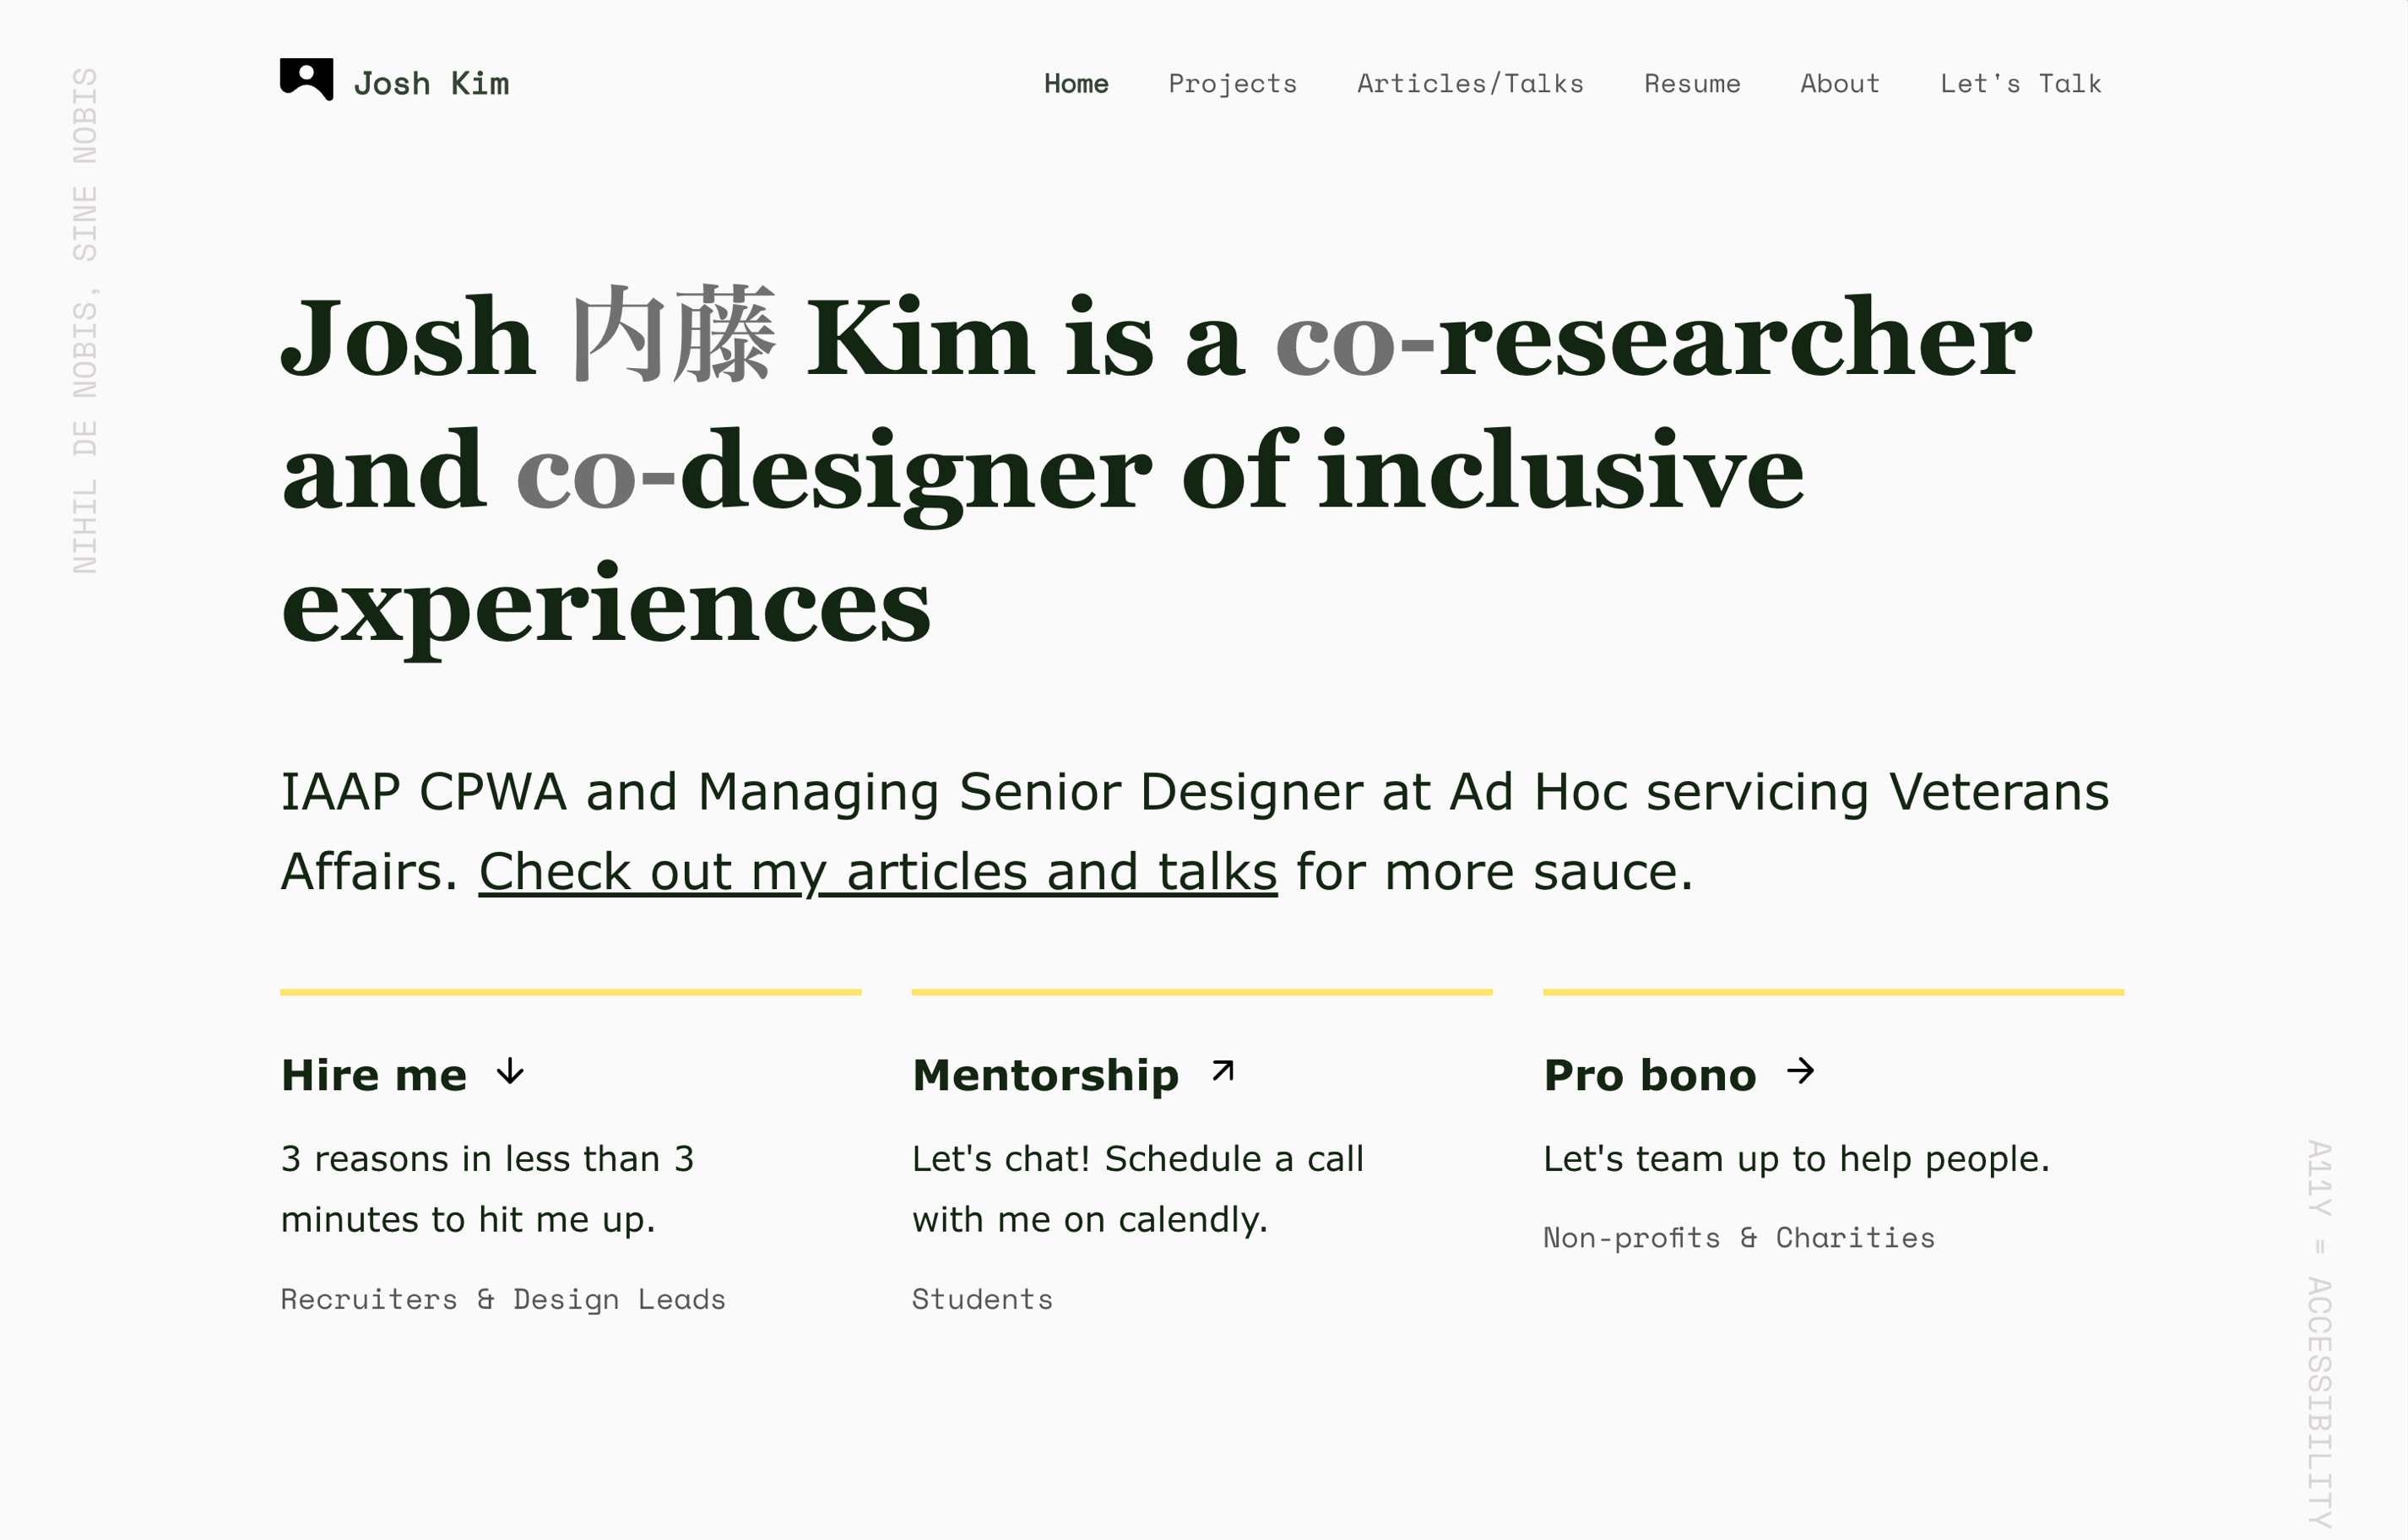 The 2020 homepage of my portfolio features a new tagline and a stronger focus on content.